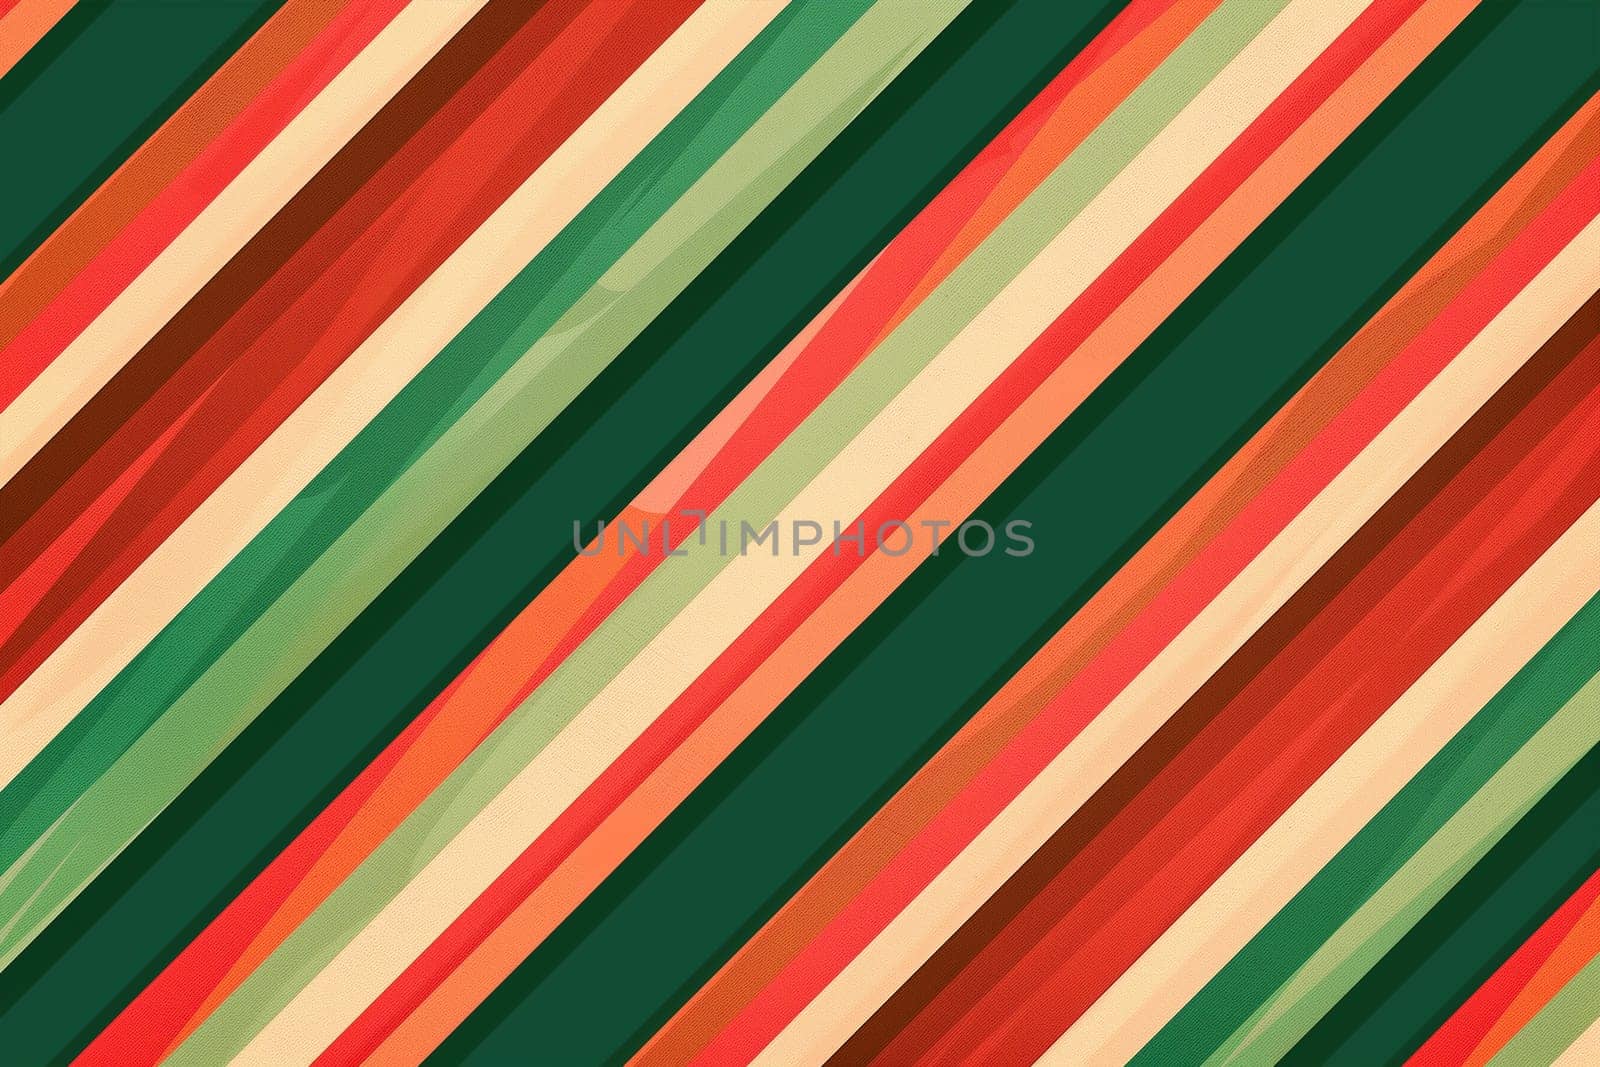 A colorful background featuring horizontal stripes in green, red, and white colors.